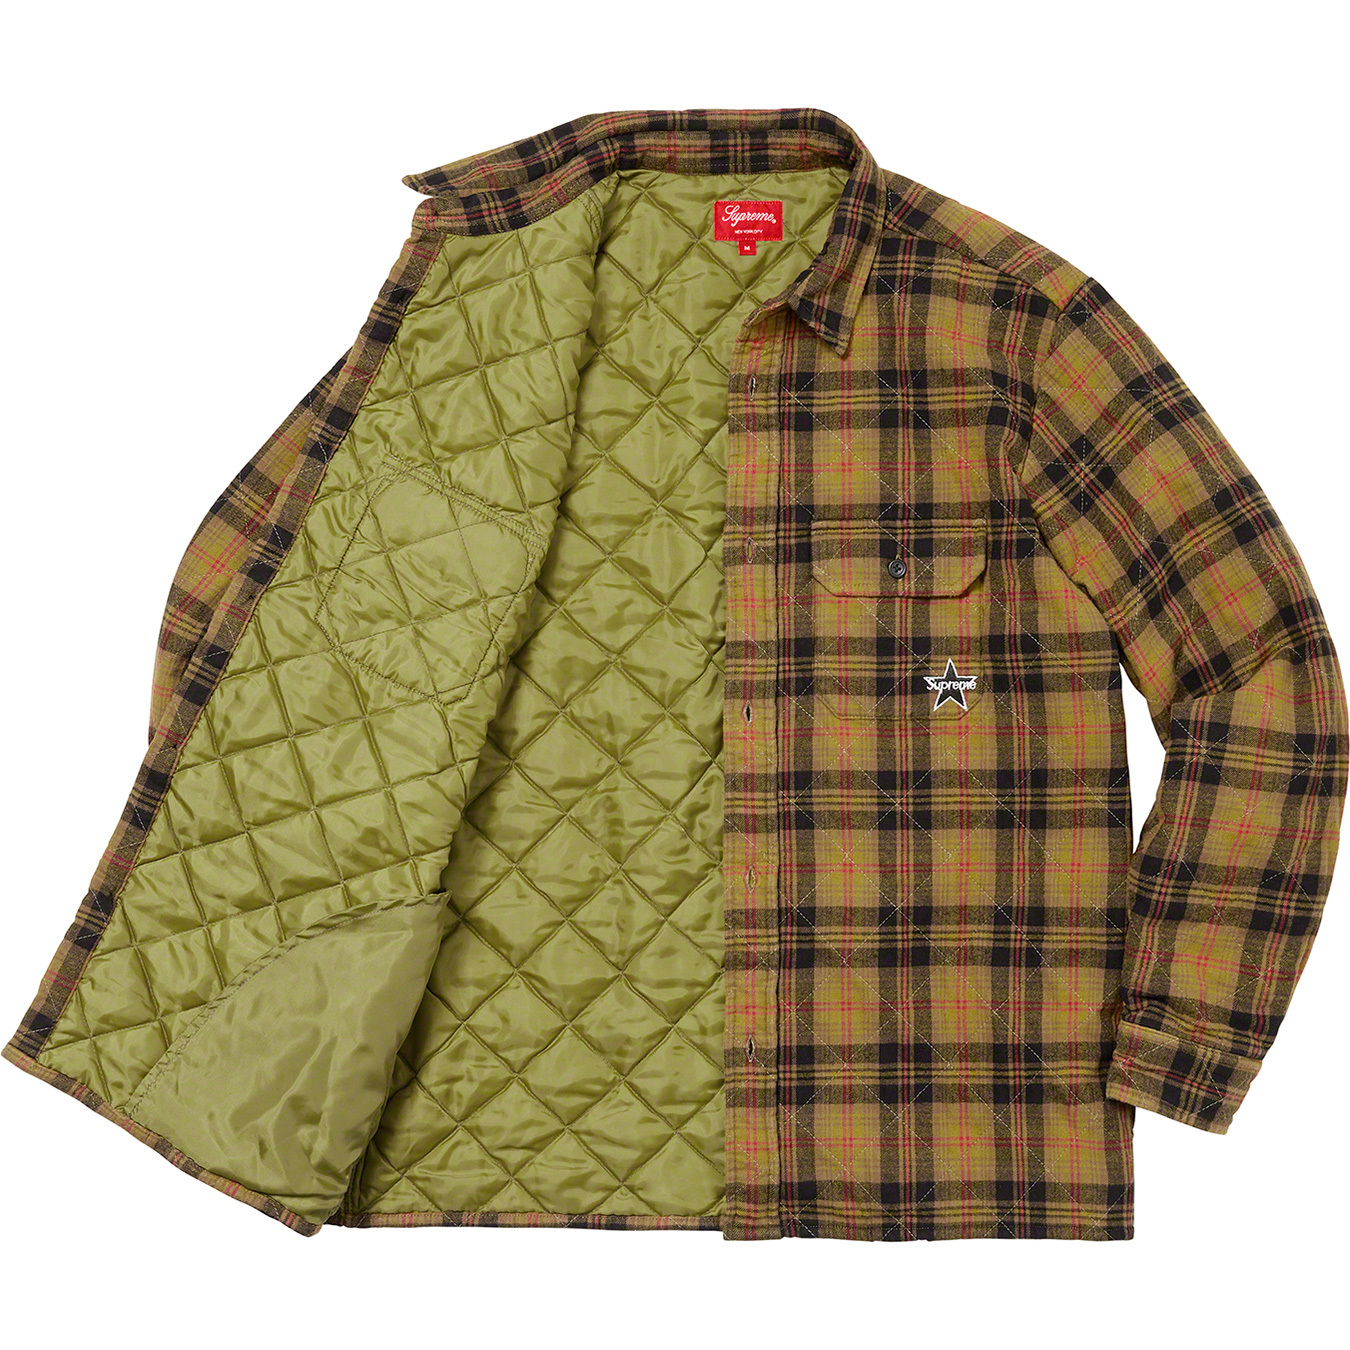 Quilted Plaid Flannel Shirt - Supreme Community